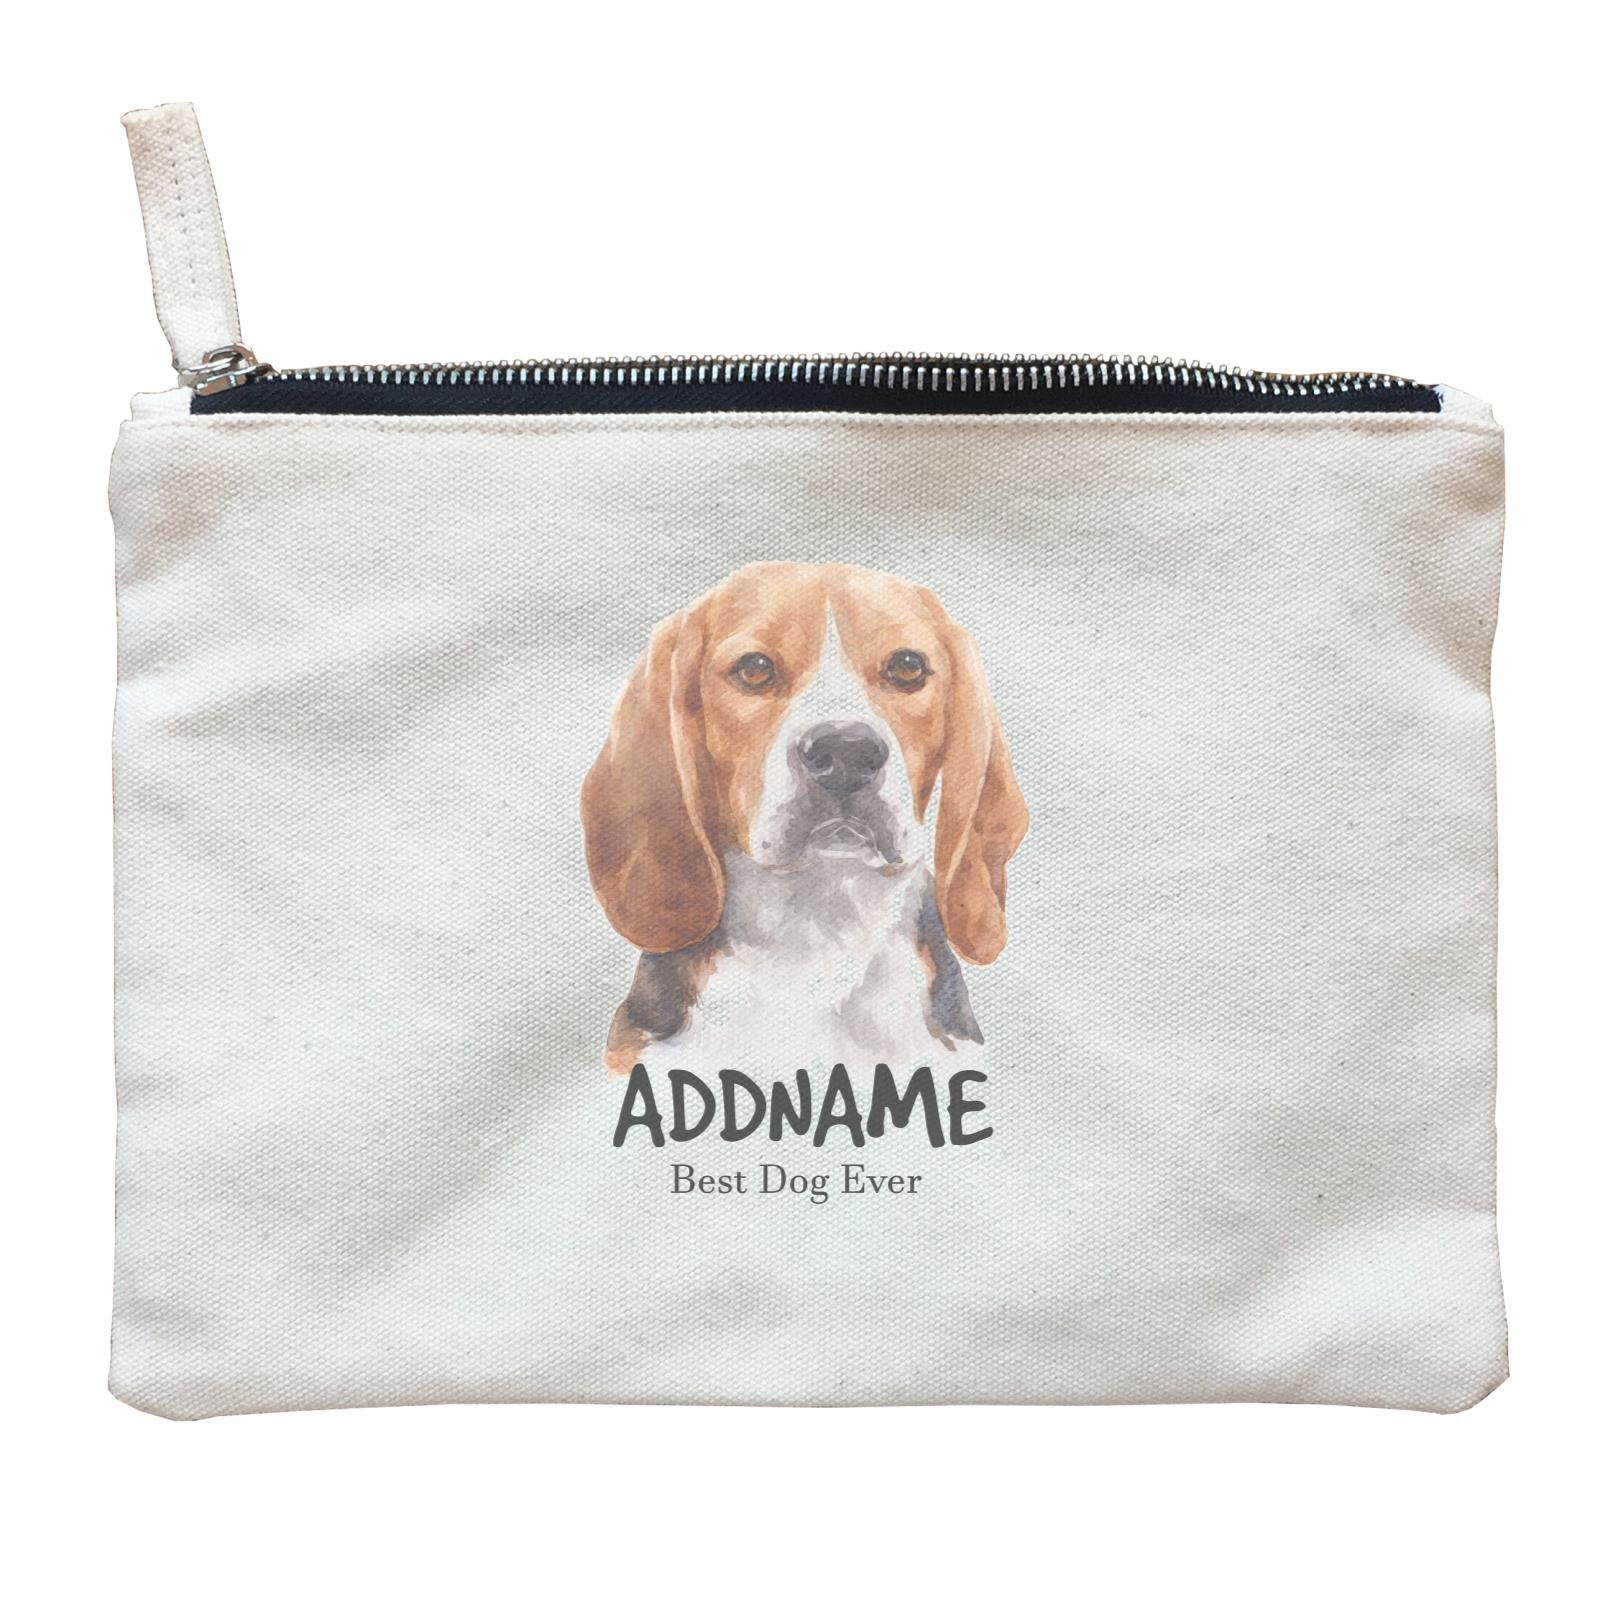 Watercolor Dog Beagle Frown Best Dog Ever Addname Zipper Pouch